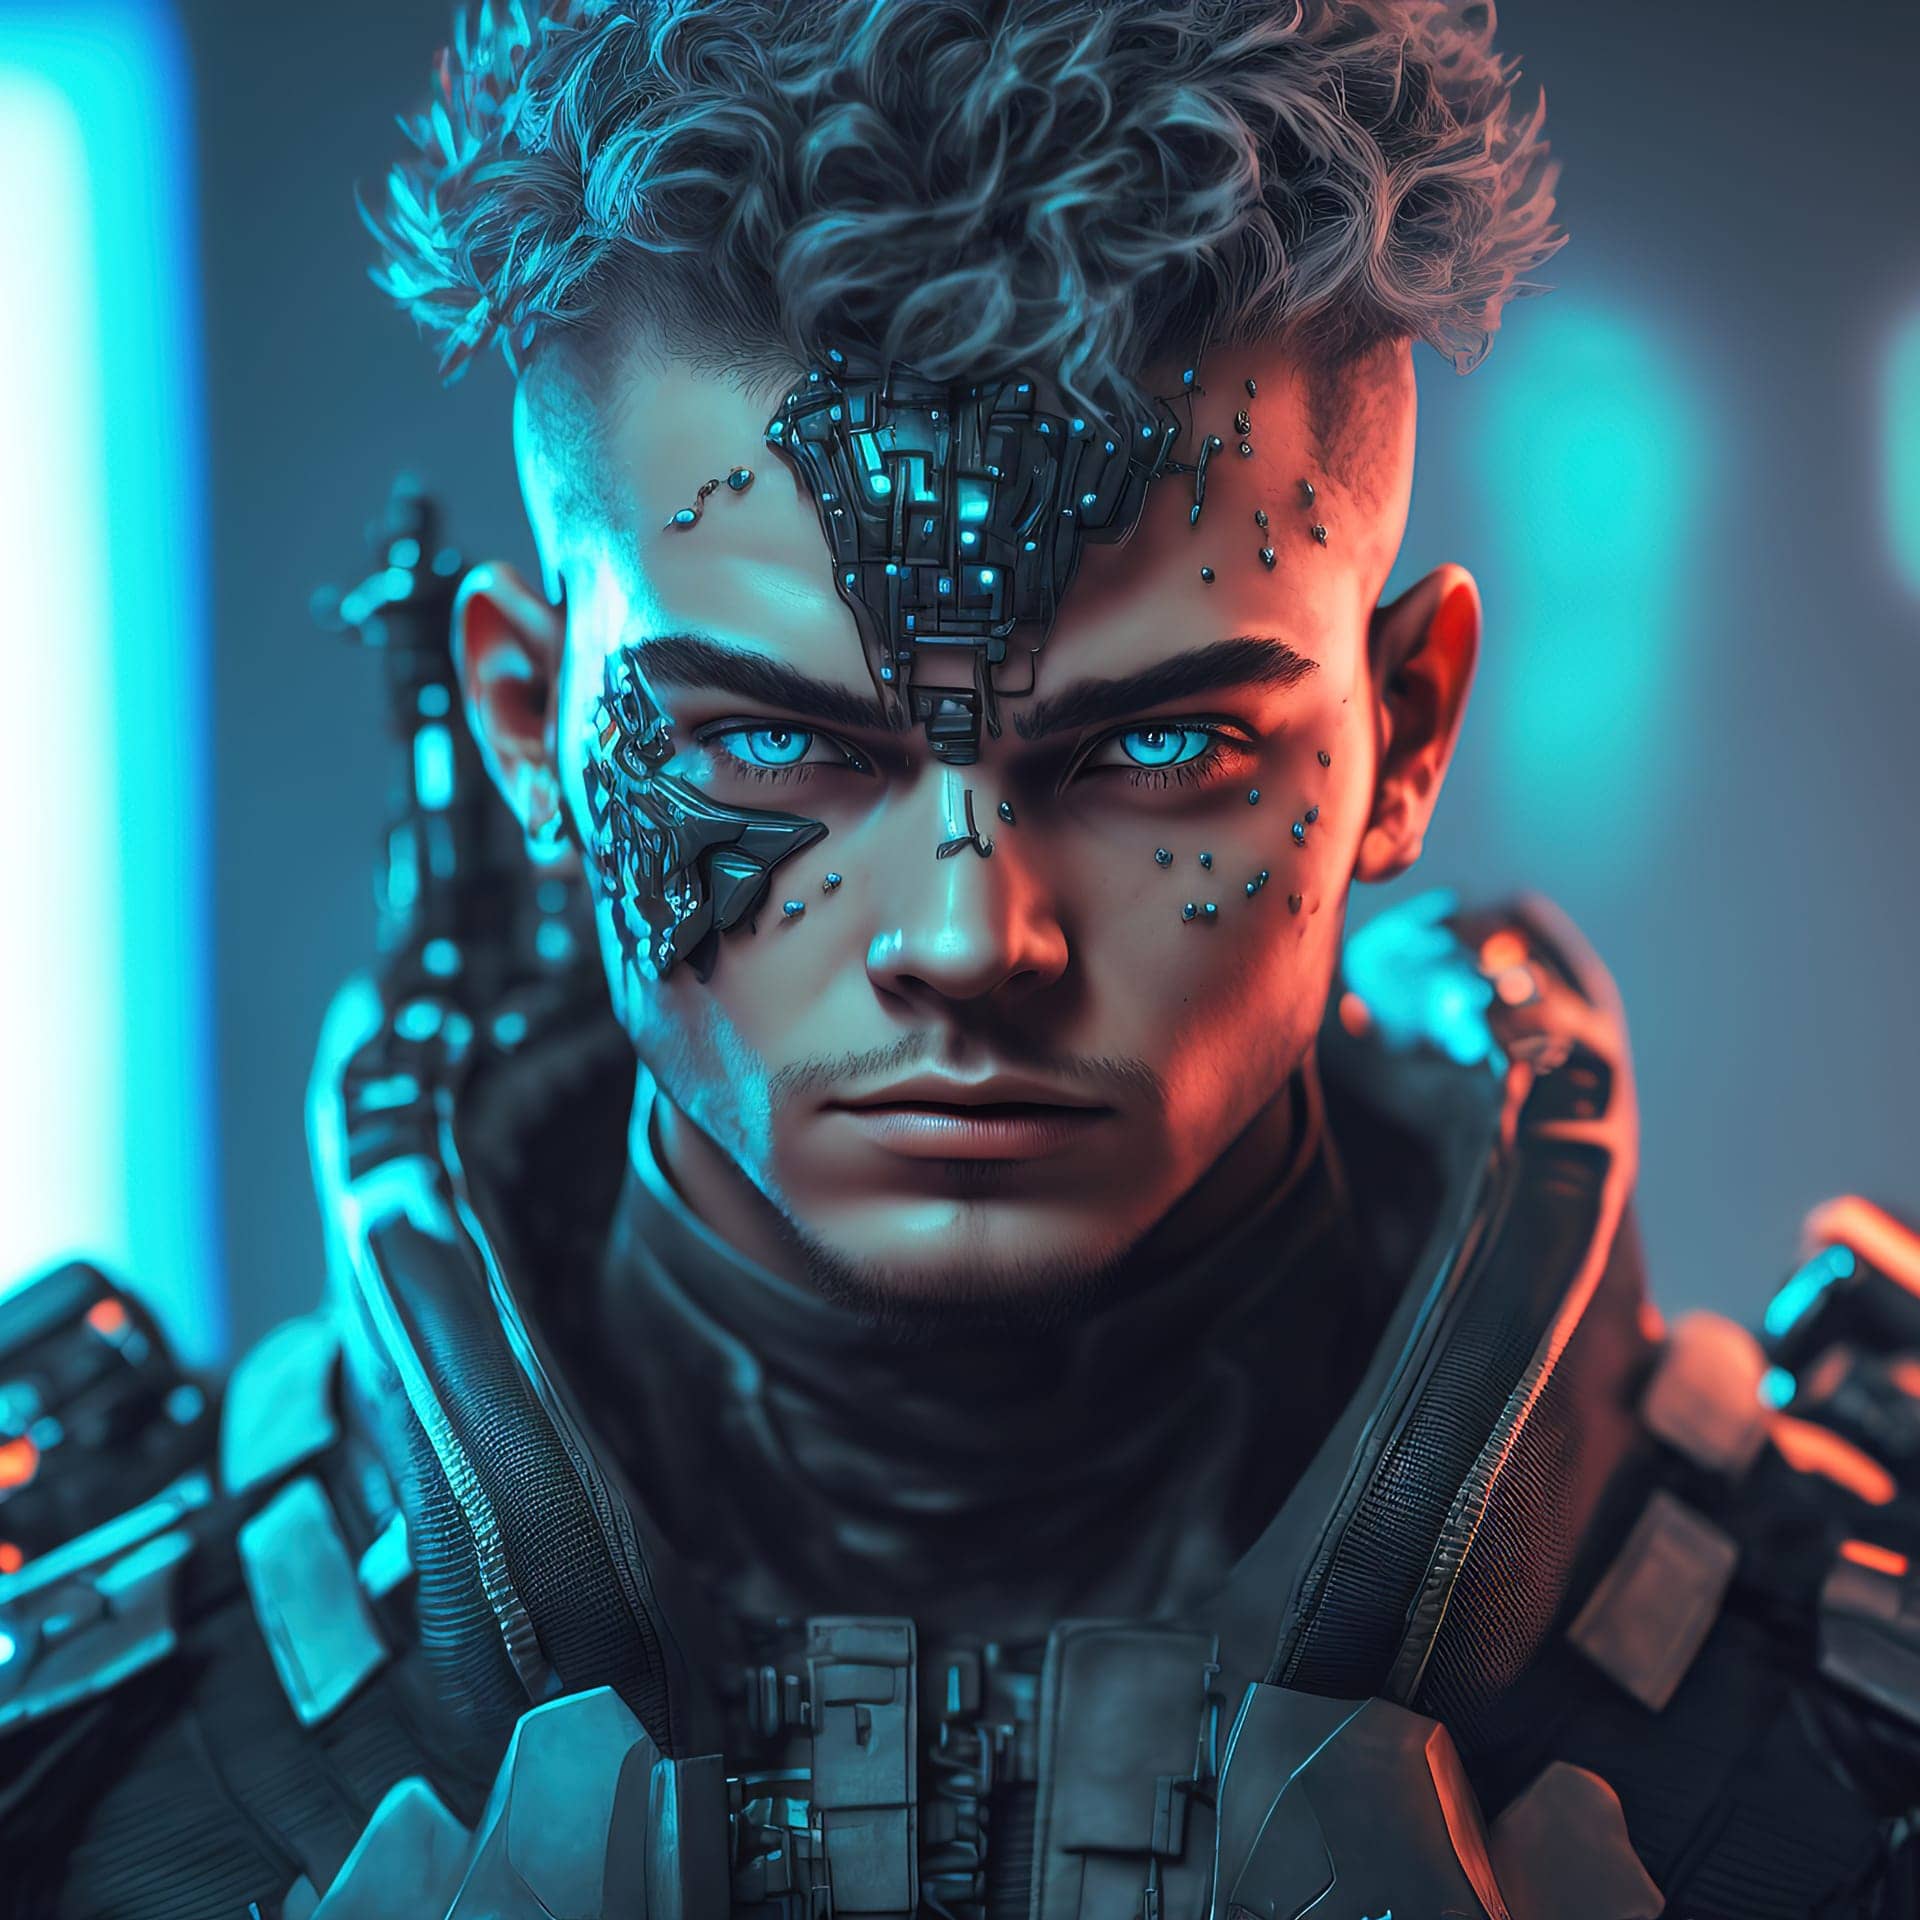 Cyberpunk space hunter with big gun army gear excellent picture